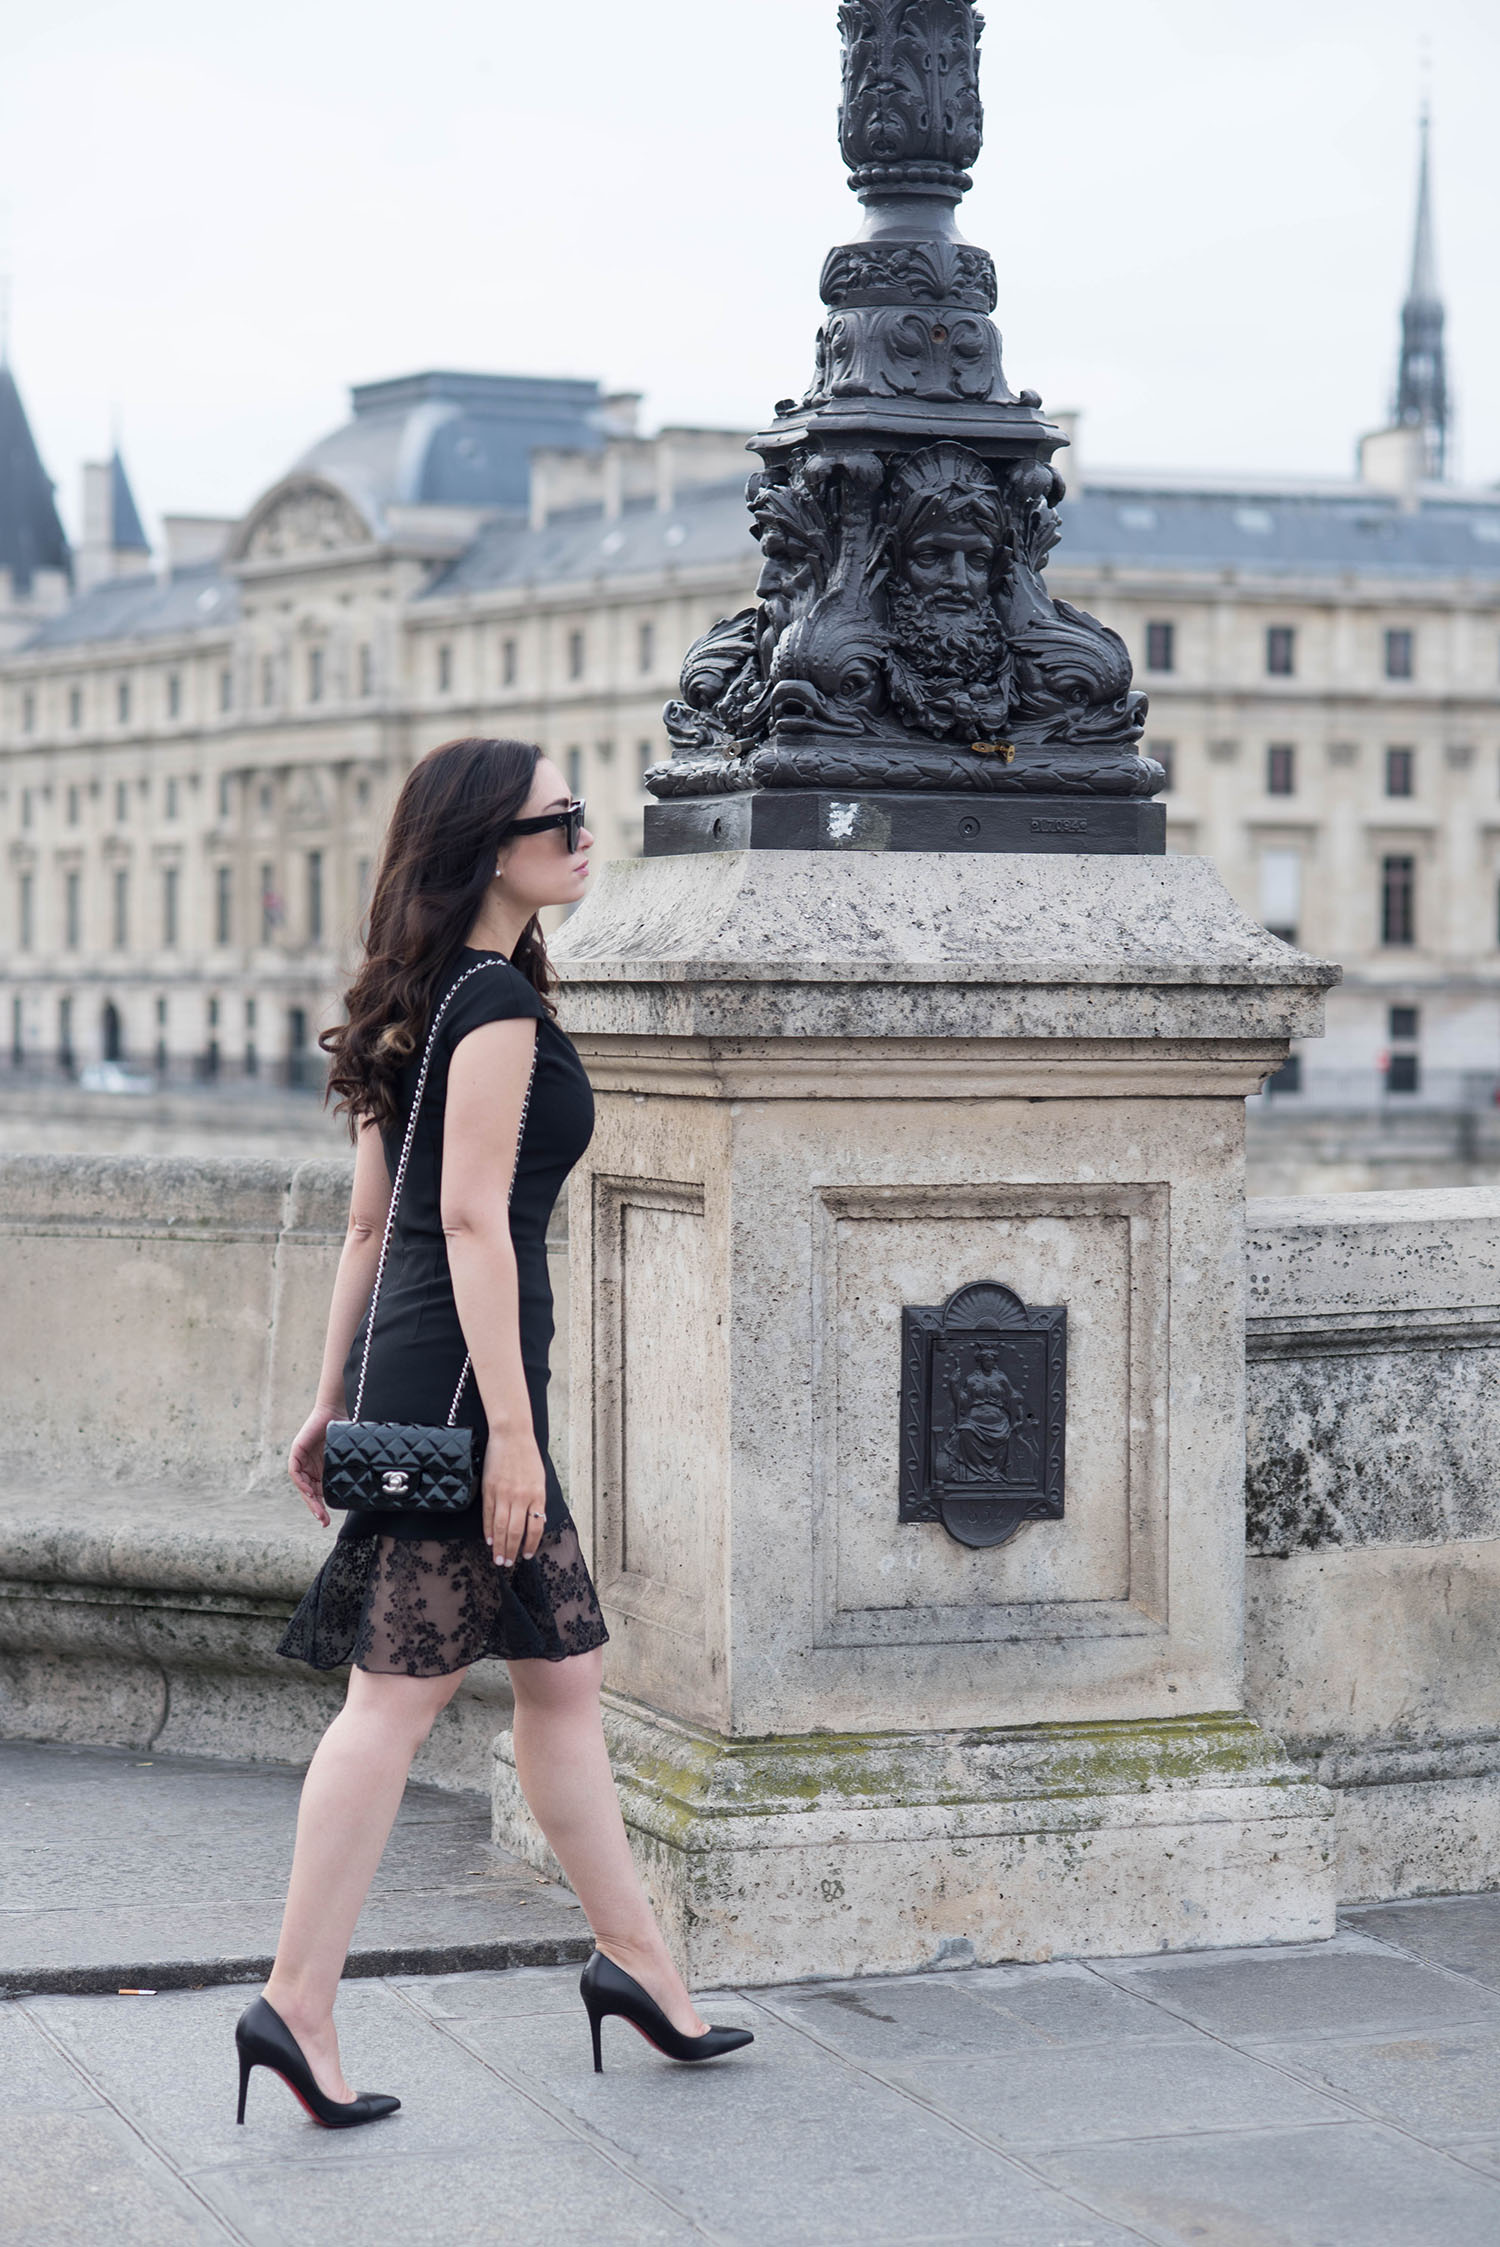 Fashion blogger Cee Fardoe of Coco & Vera walks on Pont-Neuf in Paris wearing a Carven LBD and Christian Louboutin Pigalle pumps